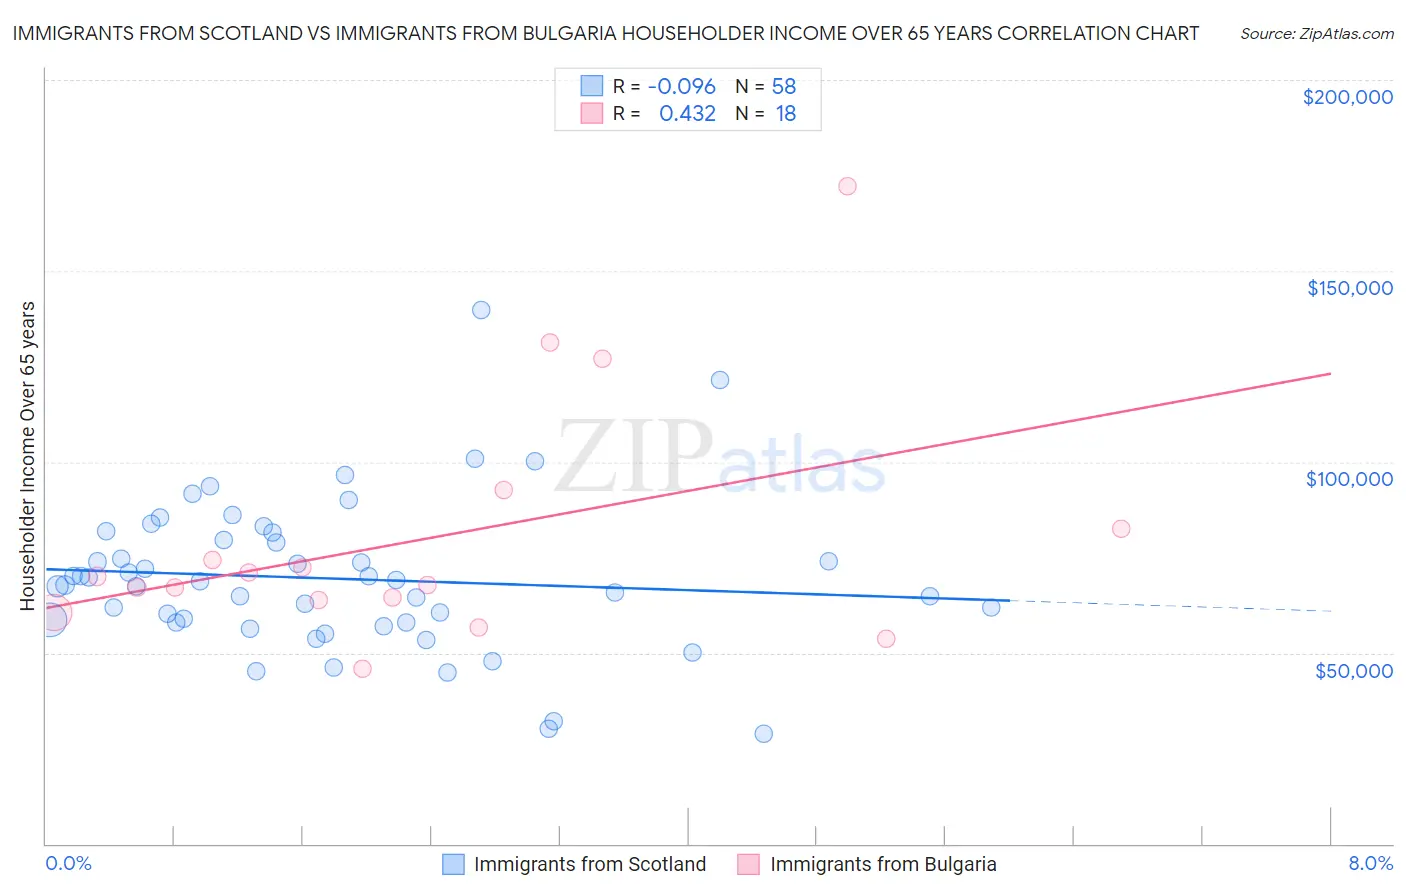 Immigrants from Scotland vs Immigrants from Bulgaria Householder Income Over 65 years